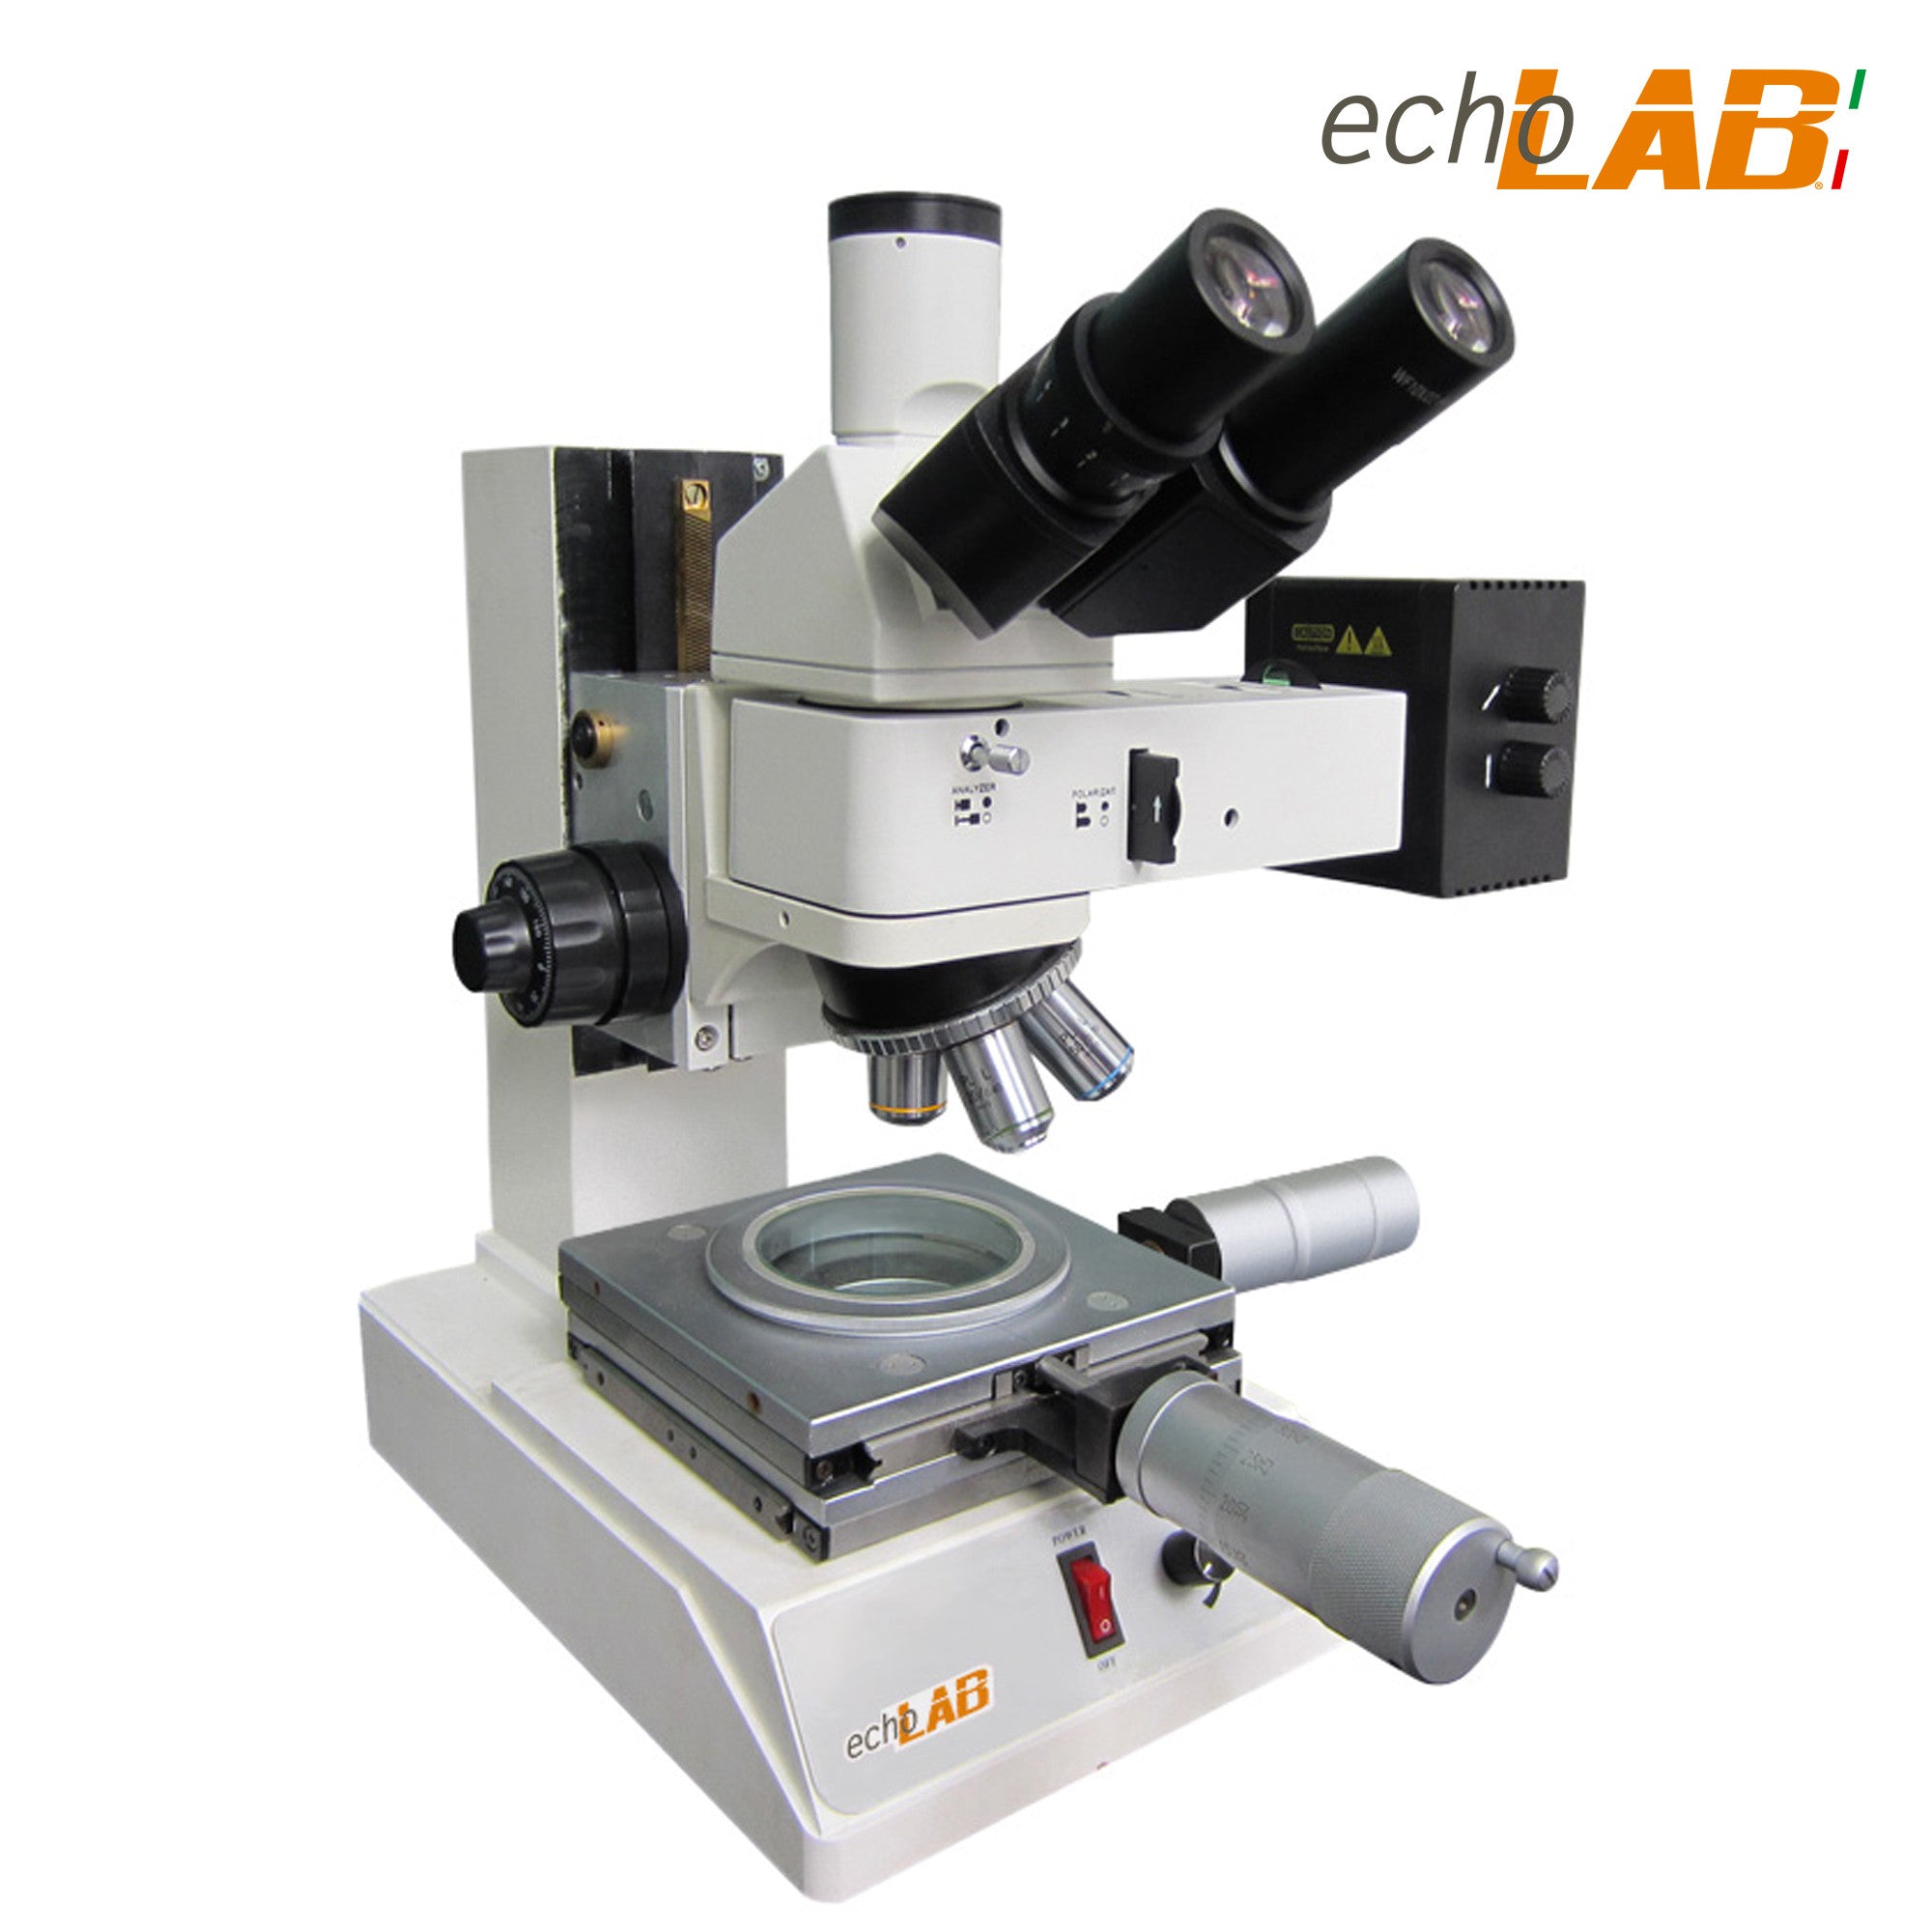 Upright material science microscopes eyepiece WF 10x (22mm)